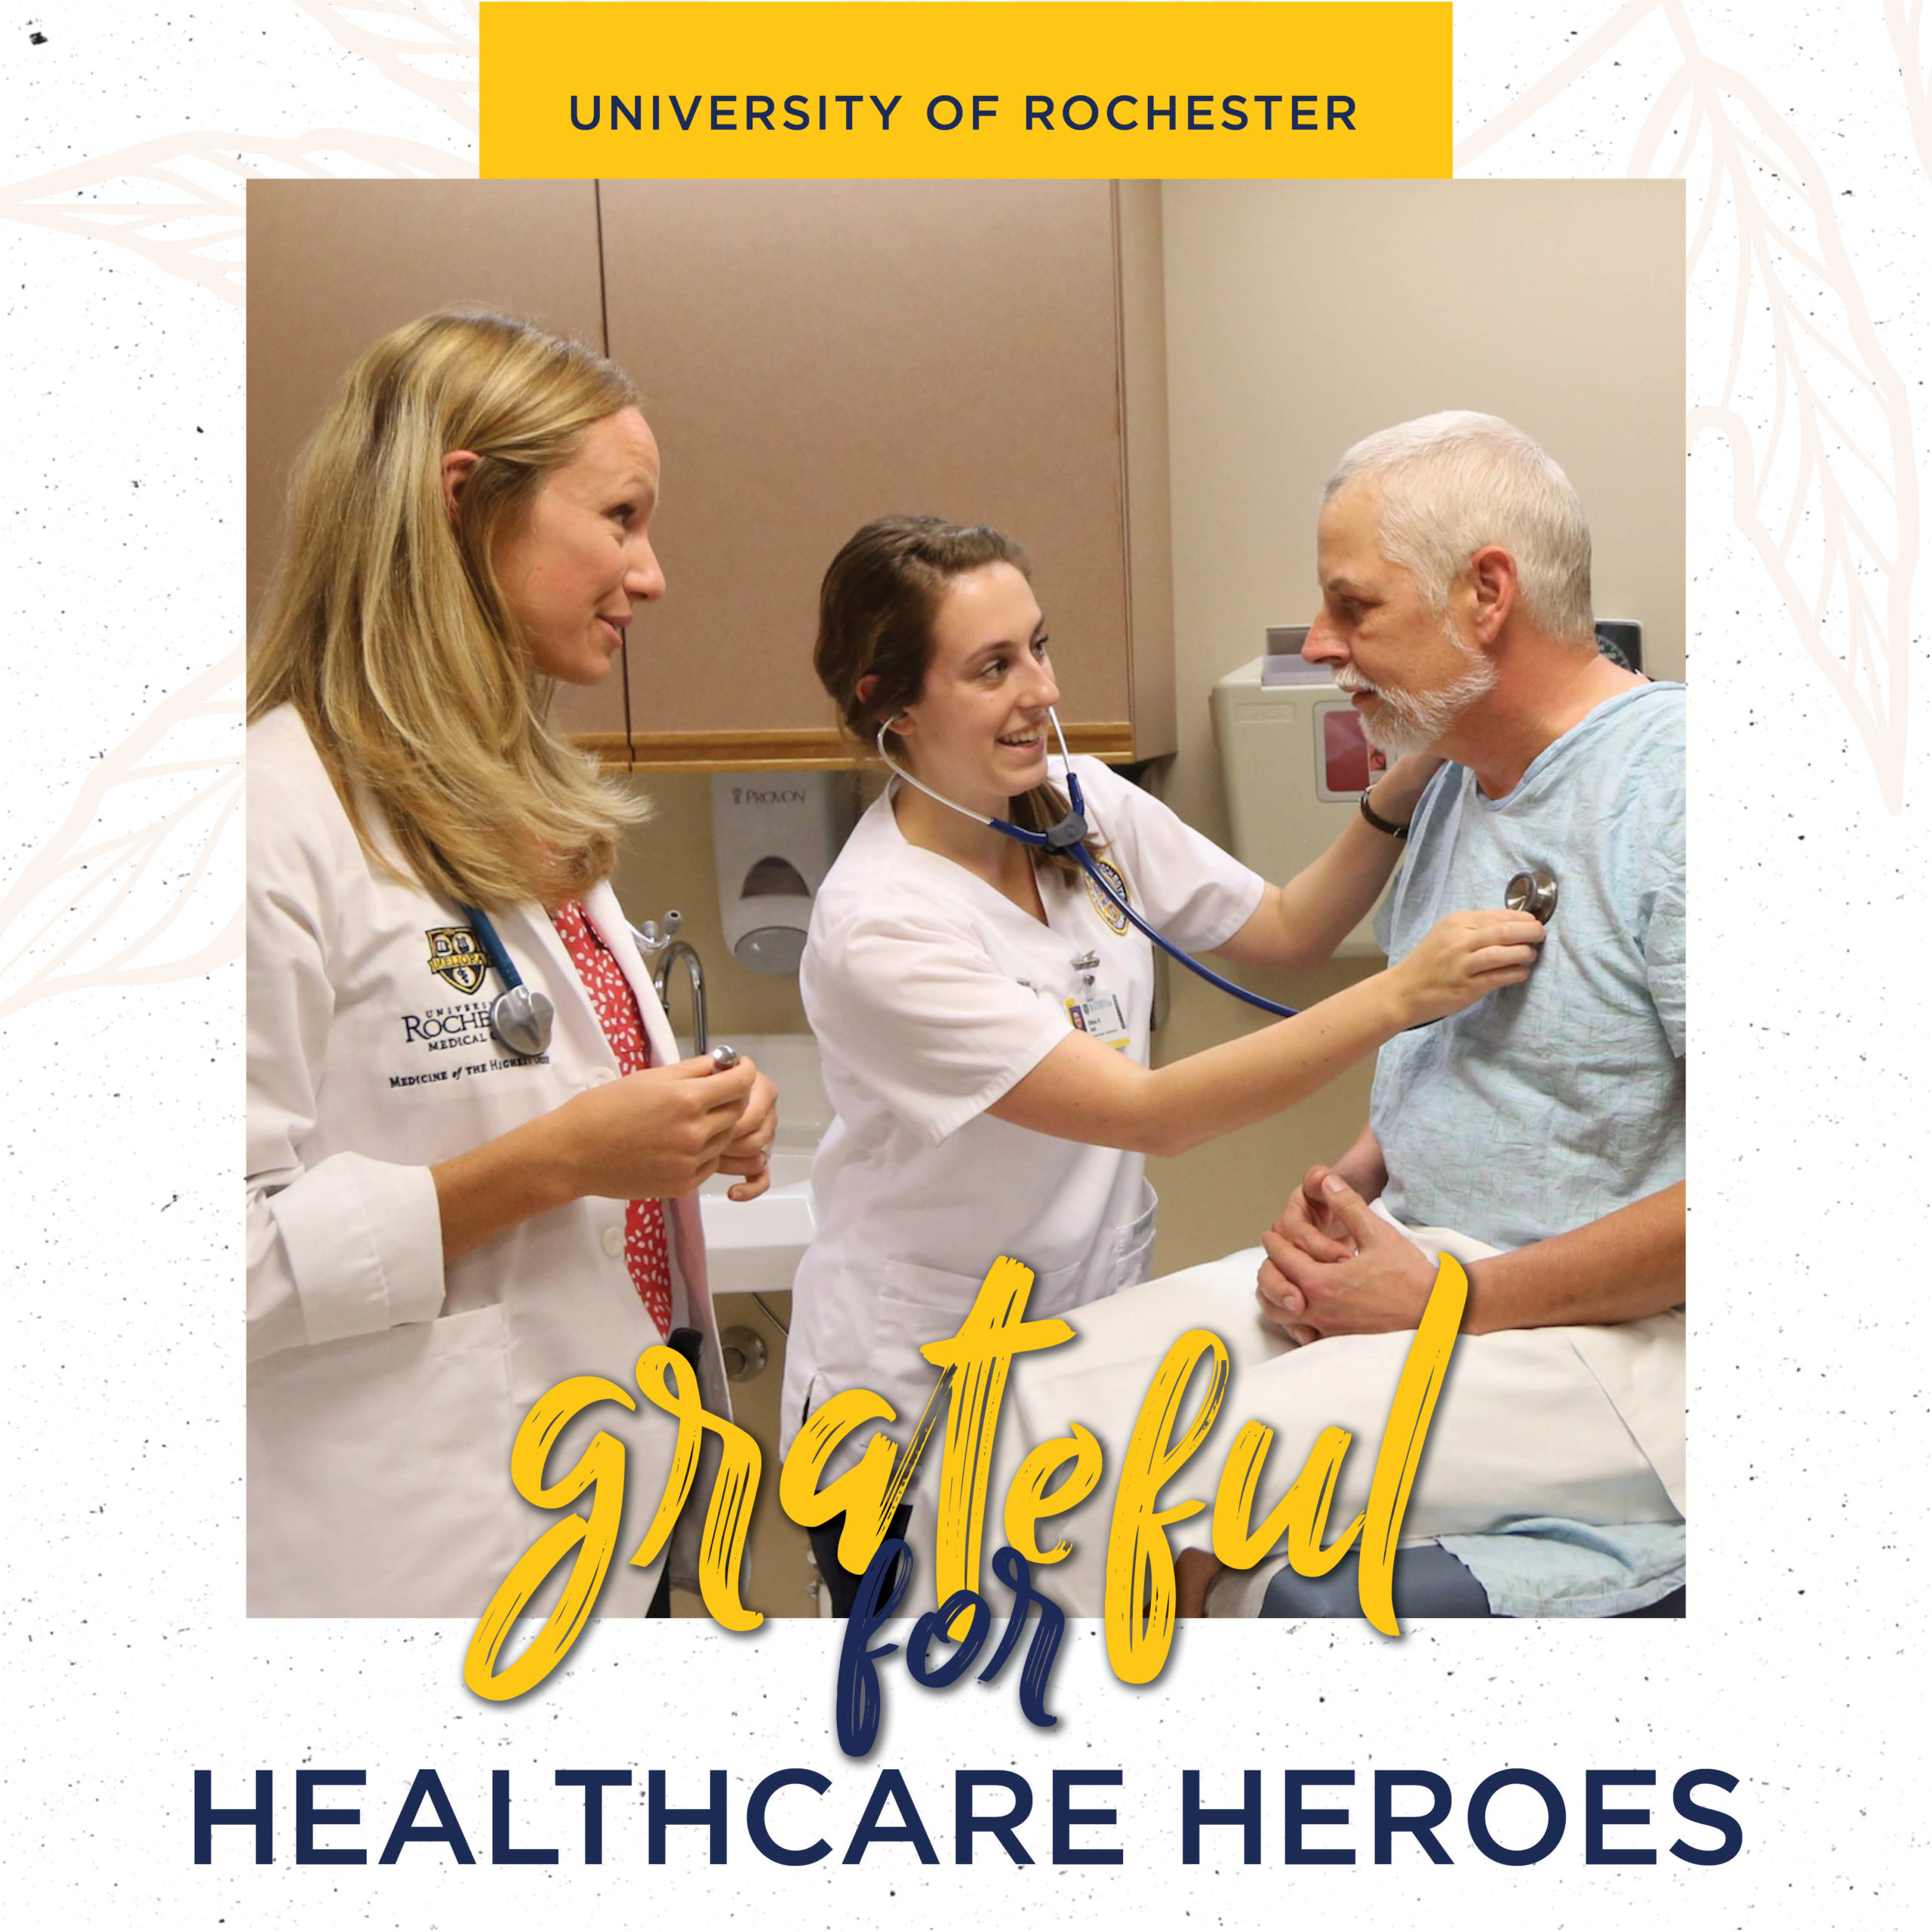 grateful for healthcare heroes - doctor and nurse meet with patient, using stethoscope